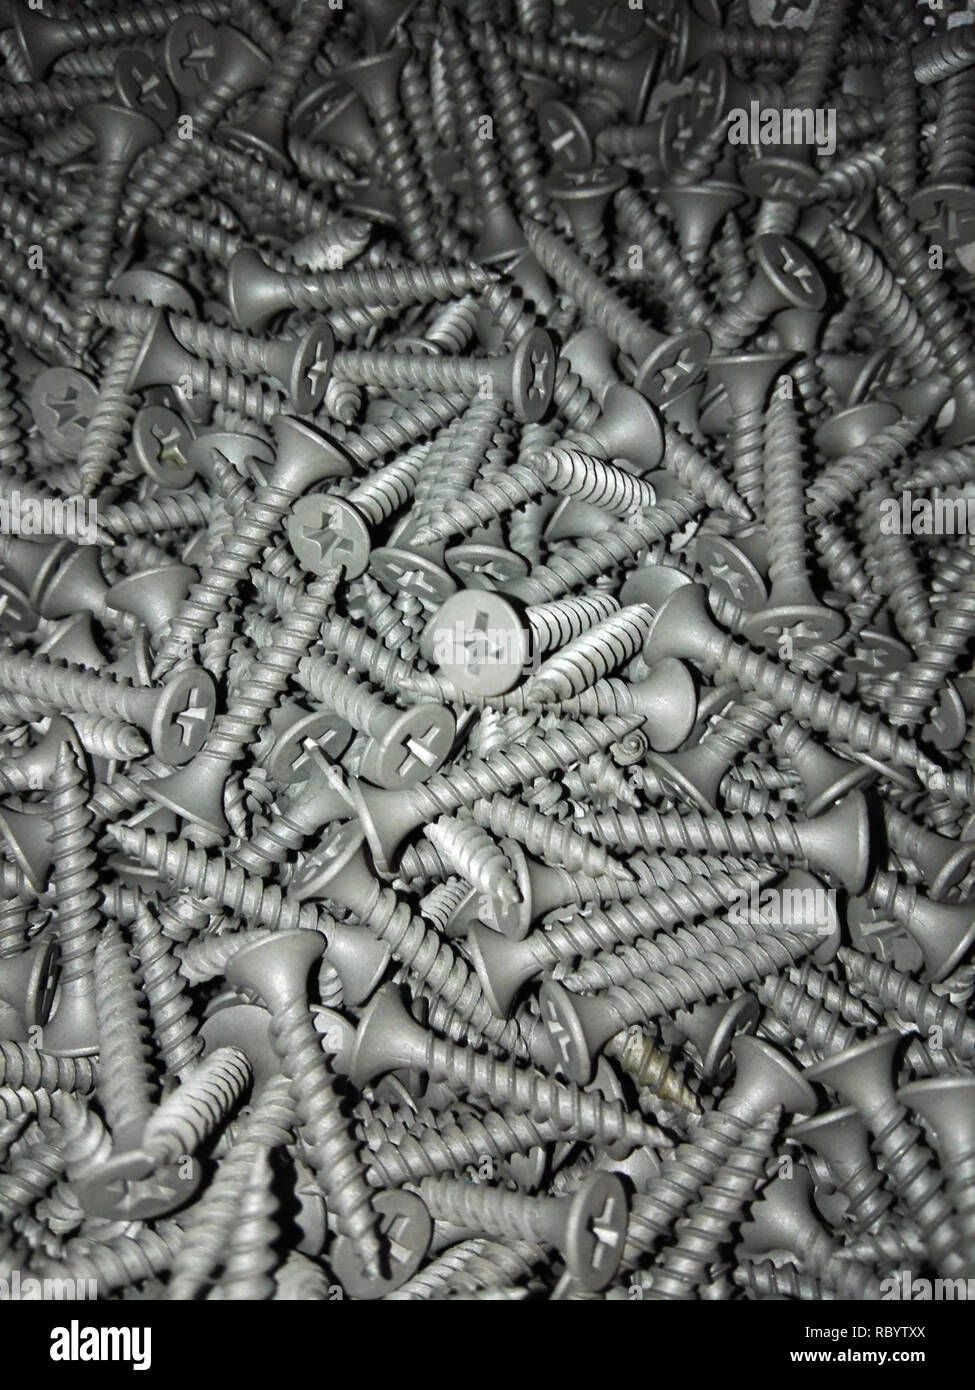 Screws flat lay vertical orientation with gradient light. Industrial background with many metal parts for construction Stock Photo